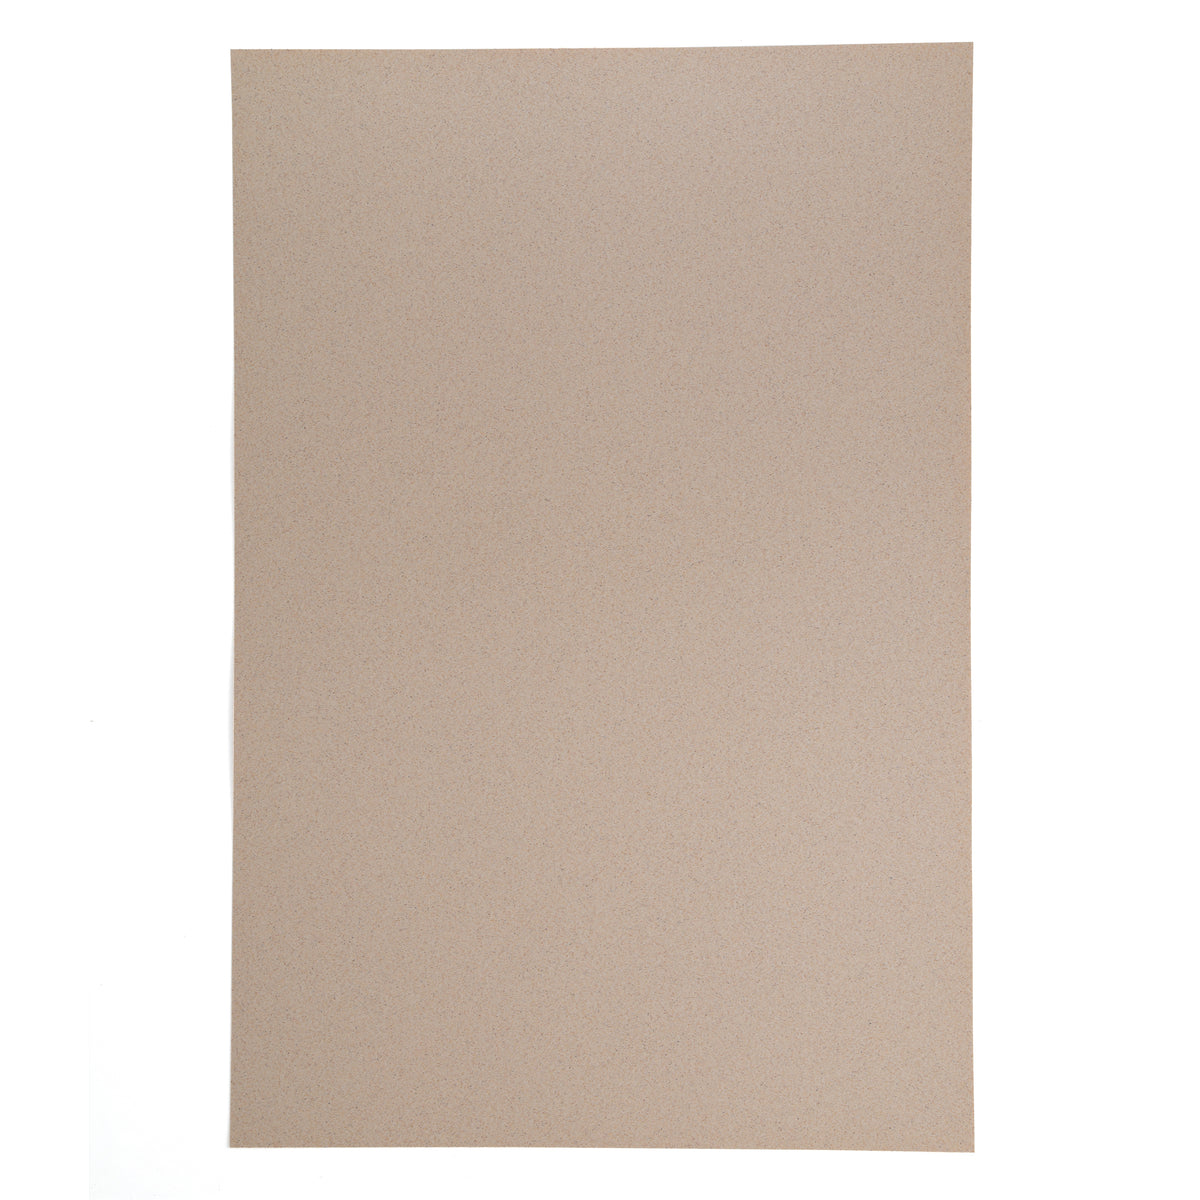 12 Pack: Terra Cotta Leather Sheet by Make Market®